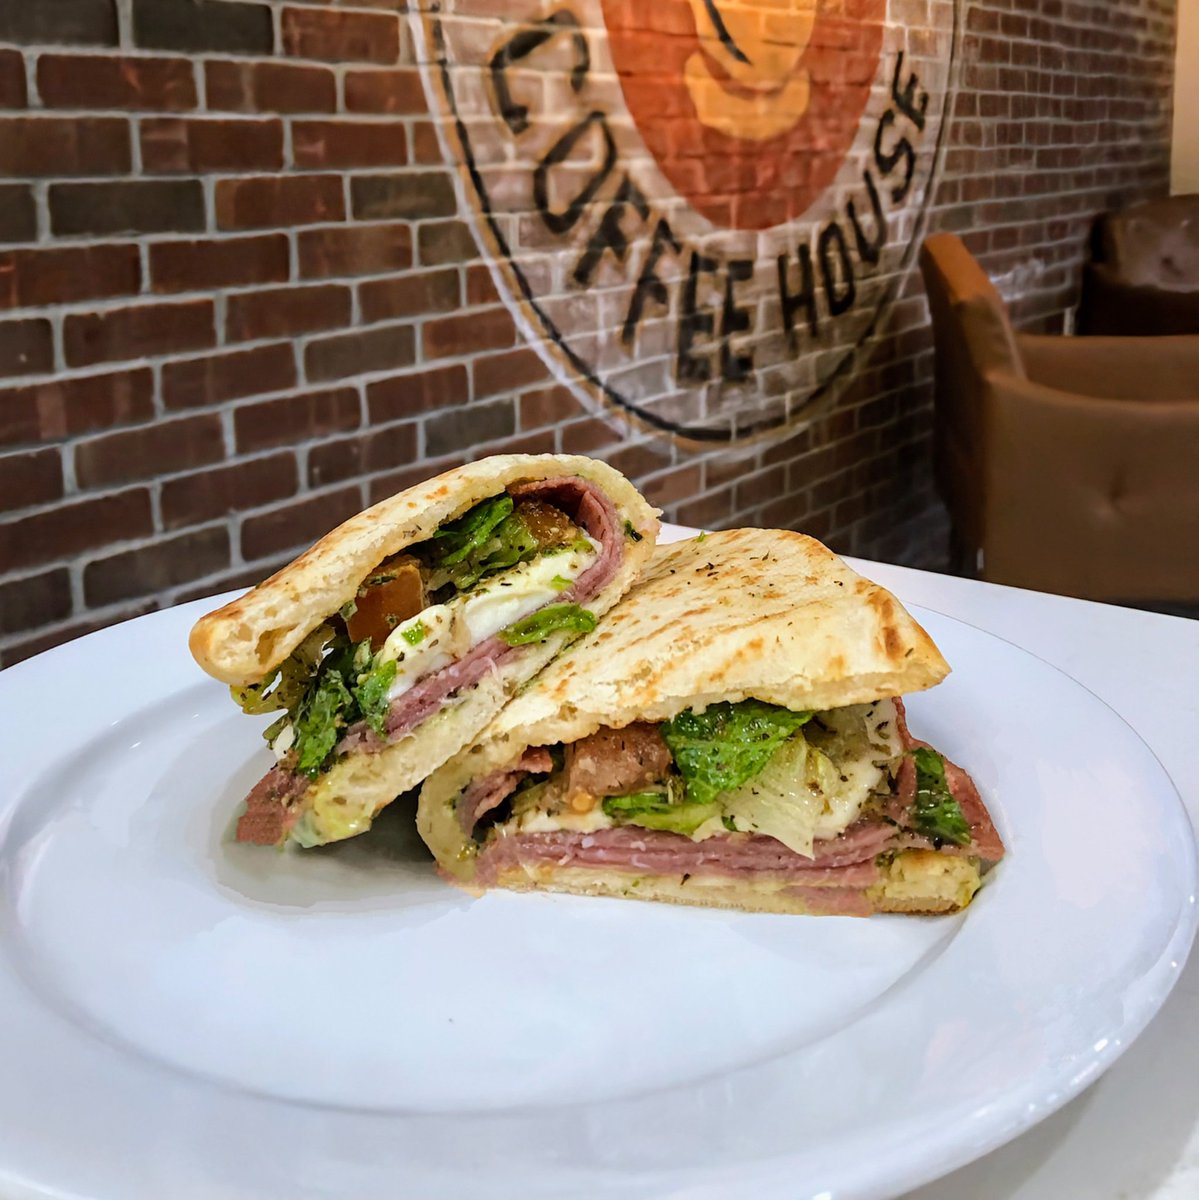 Pop in this weekend for our Italian Sammie Special! This delicious bite is packed full of salami, mozzarella, pesto aioli, oregano, lettuce and tomato on a toasted flatbread sandwich. 🤌🏻